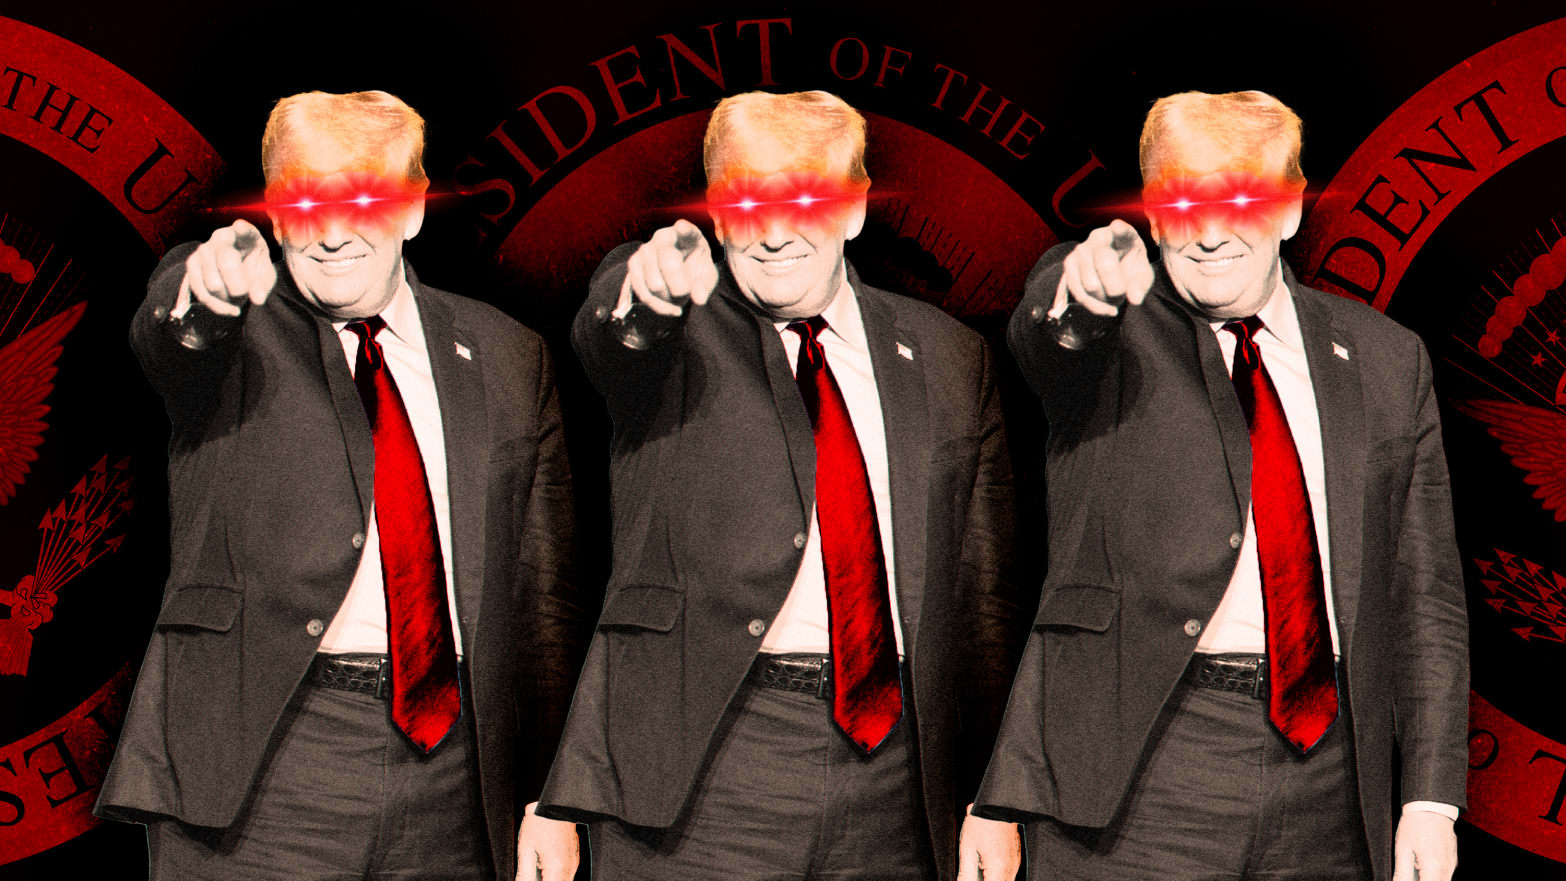 A photo illustration of former President Donald Trump with laser eyes.